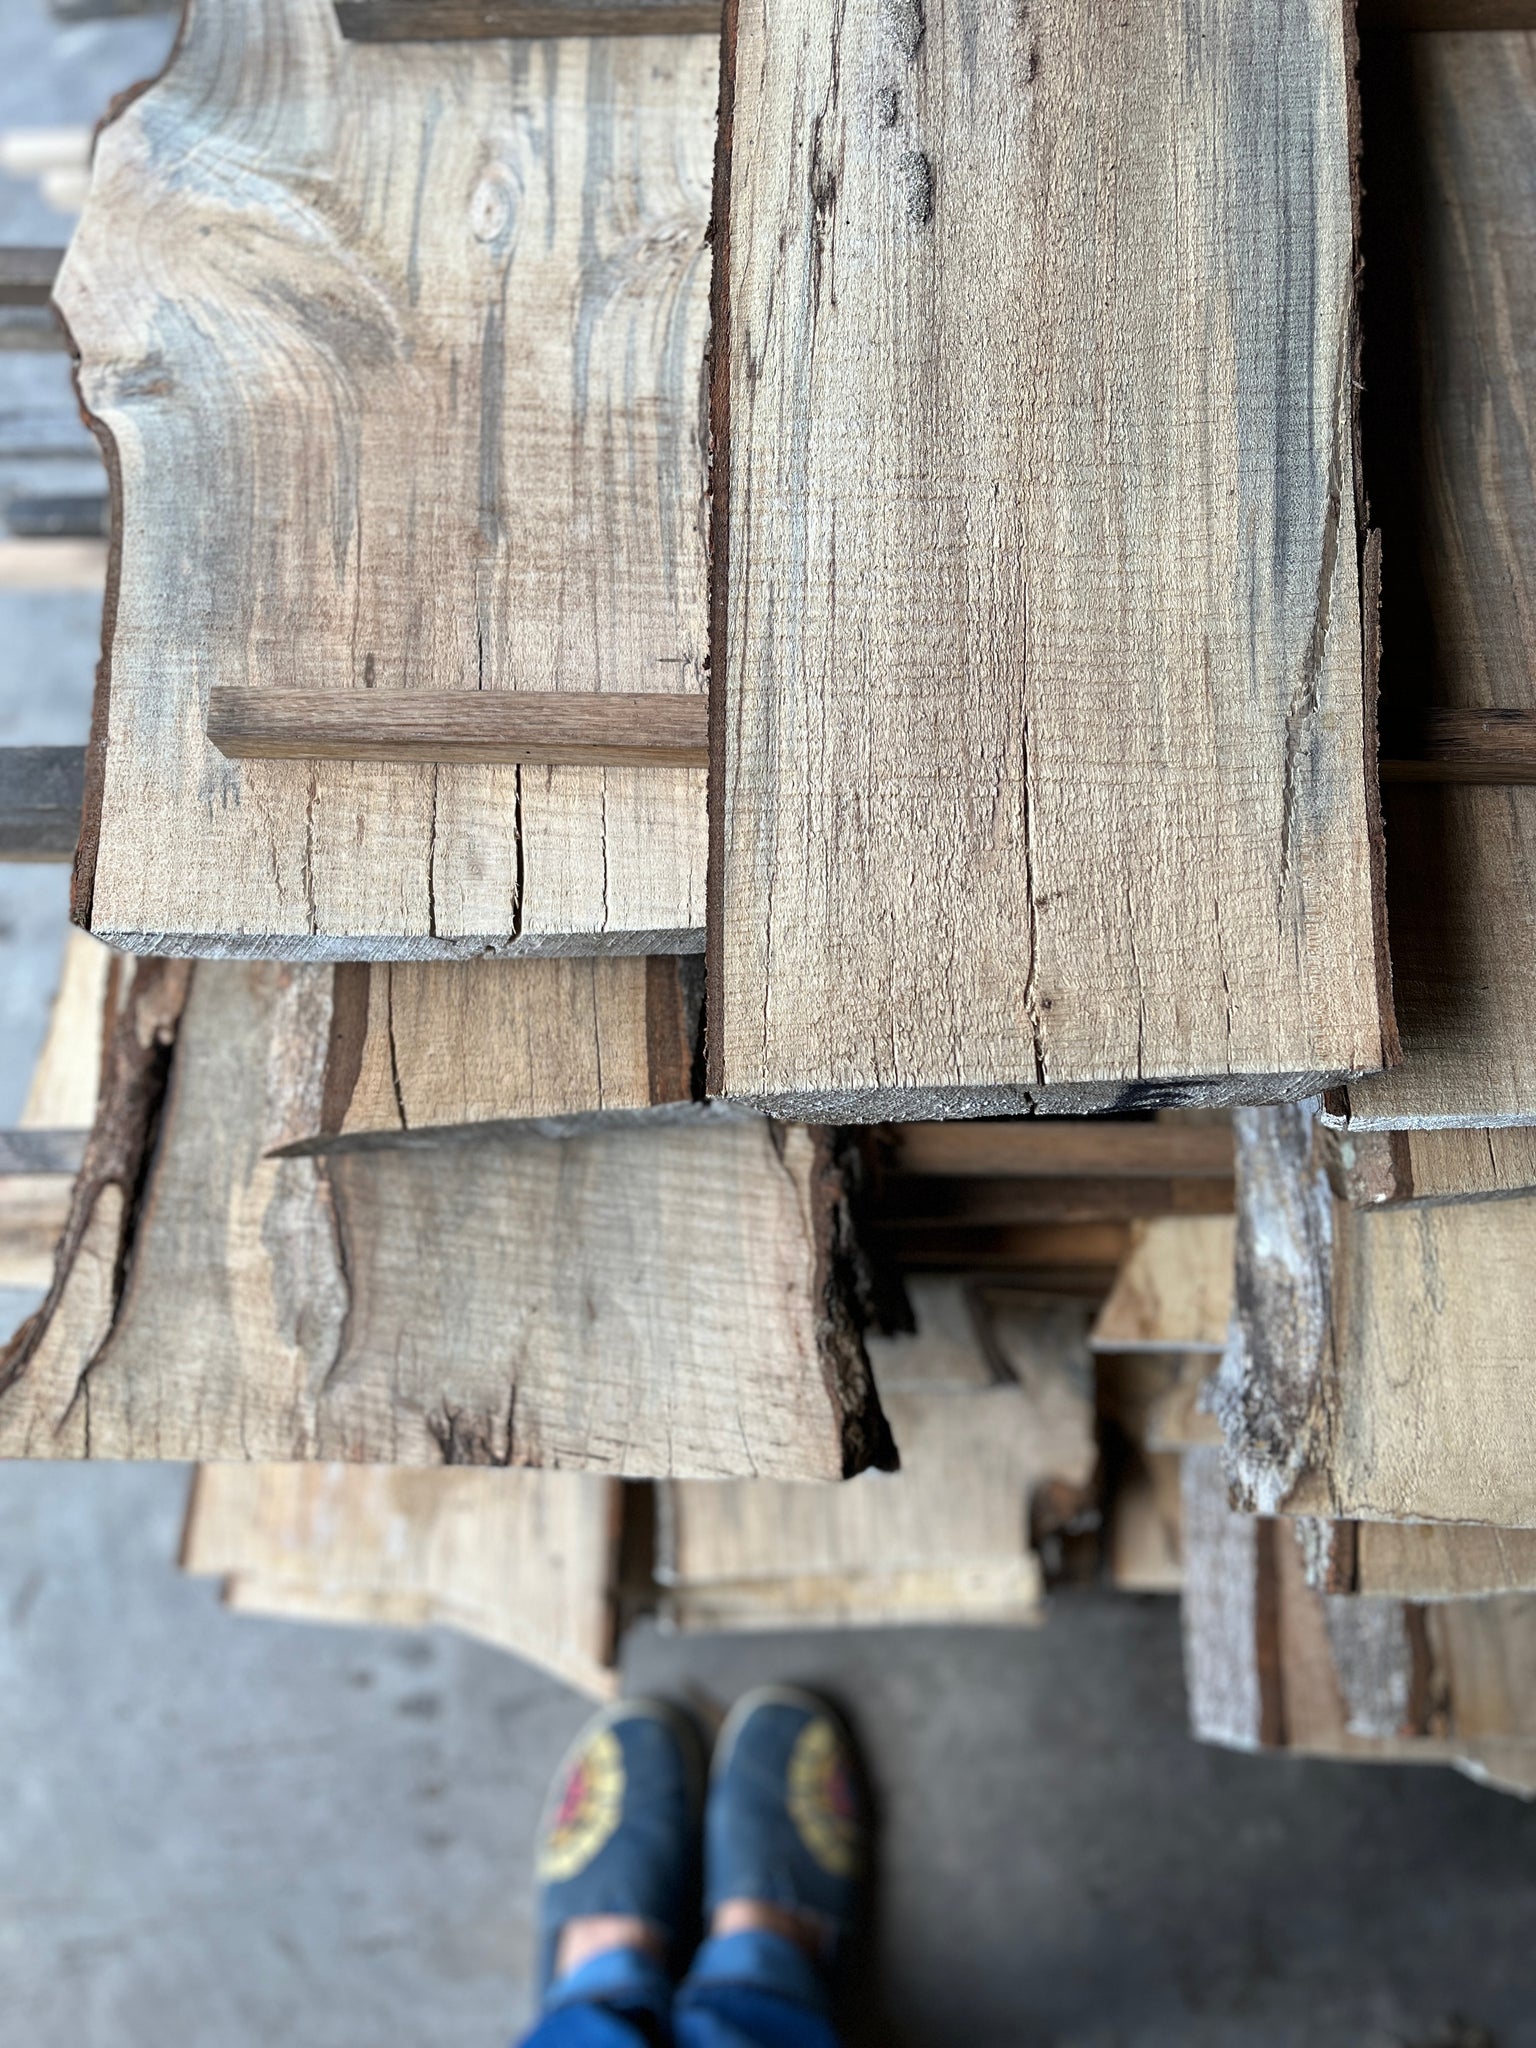 Everything You Need to Know About Kiln-Dried Wood in a Nutshell